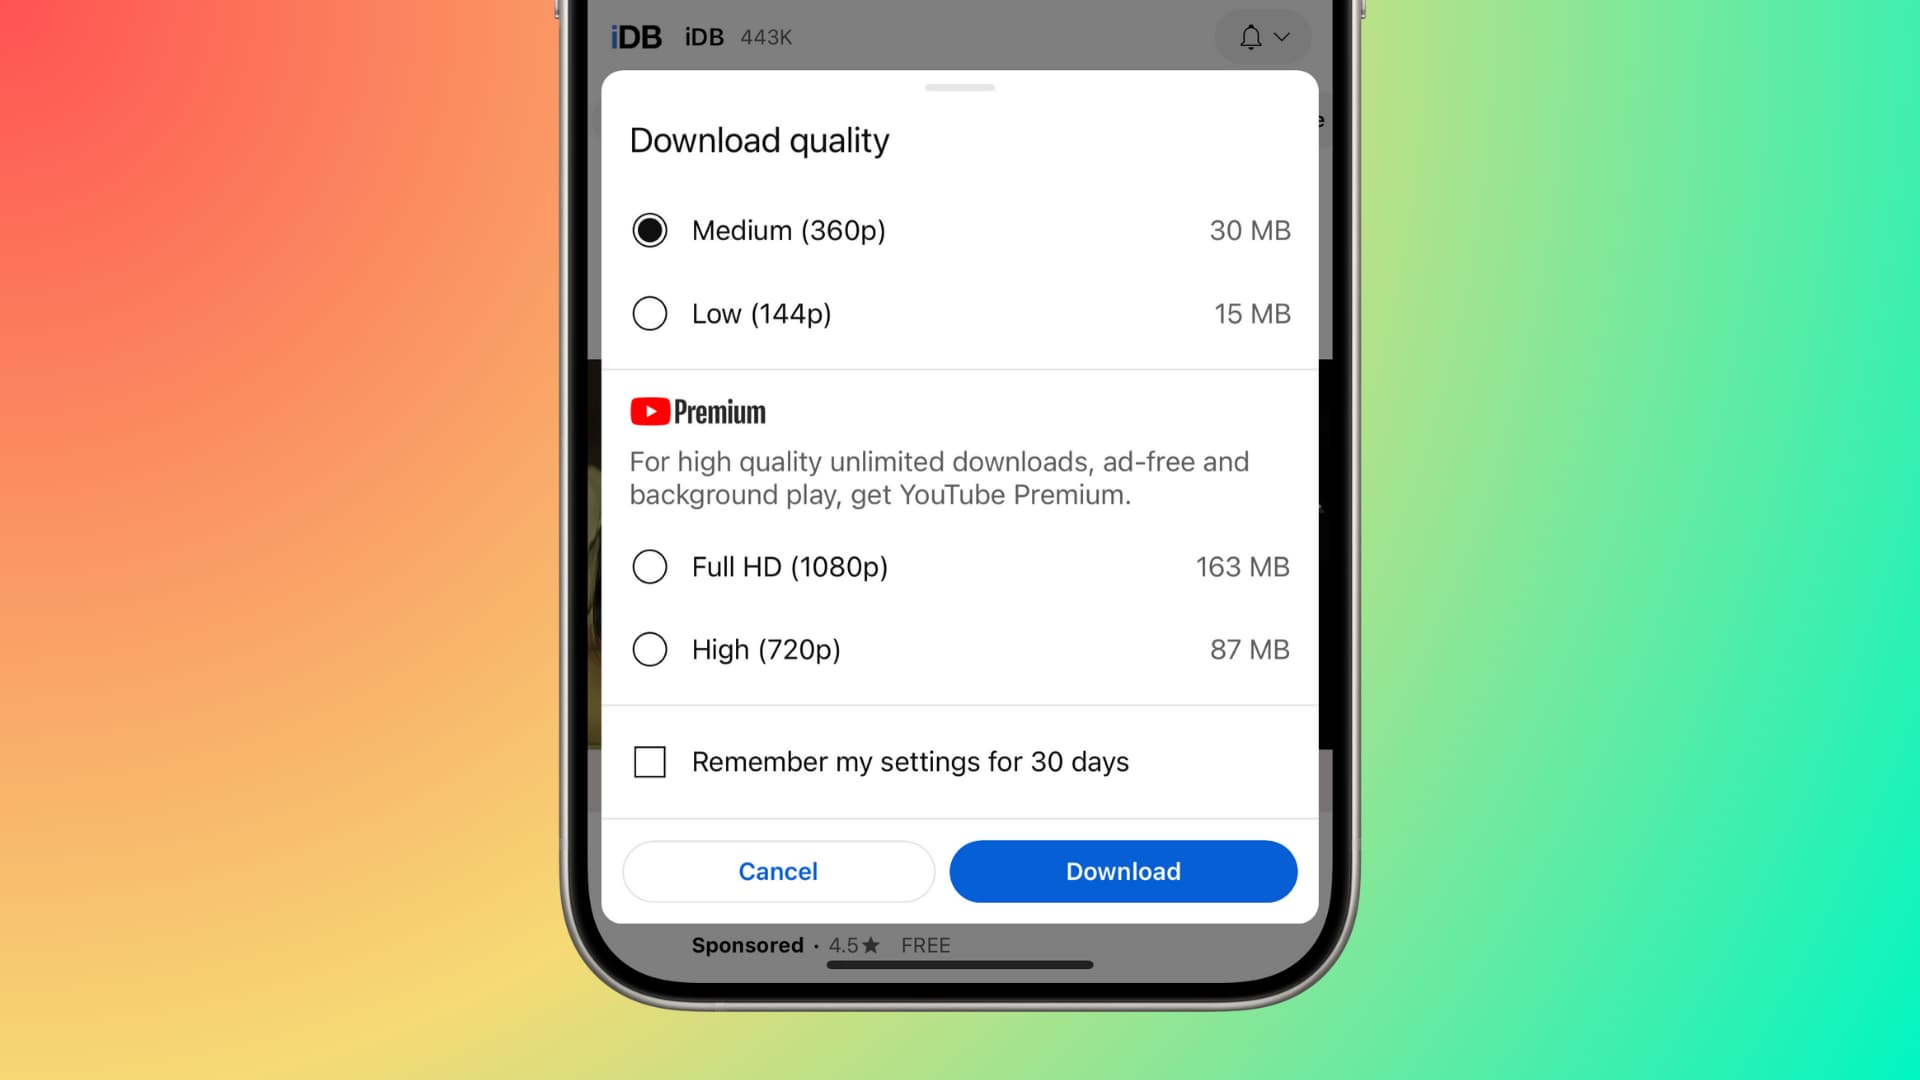 Download video quality prompt in the YouTube app